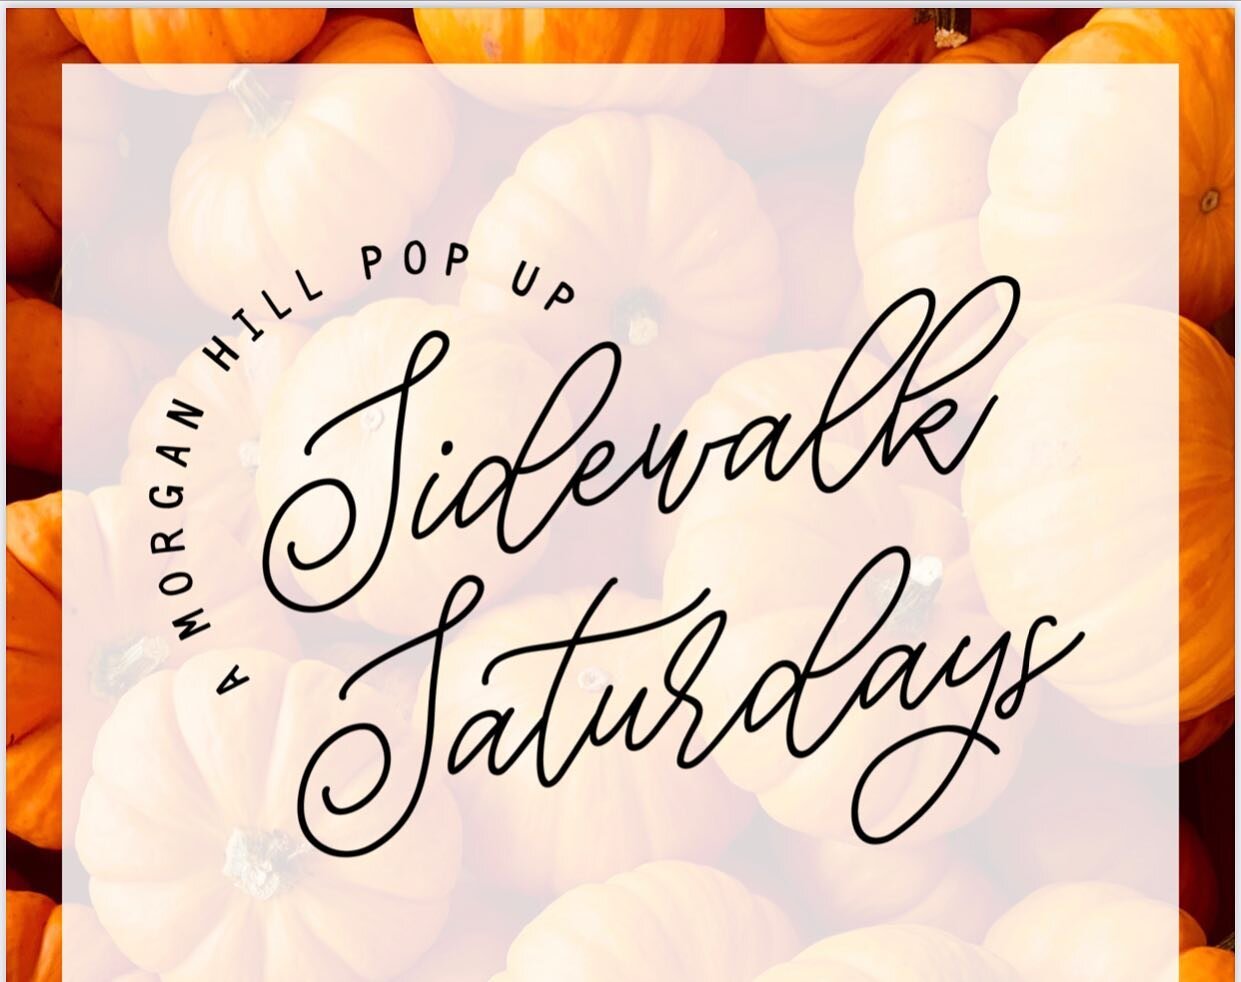 Sidewalk Saturdays will return for a Fall Season beginning September 10! Visit your favorite local makers and meet some new ones! With the holidays right around the corner, it&rsquo;s never too early to start shopping for unique and custom gifts. #bu